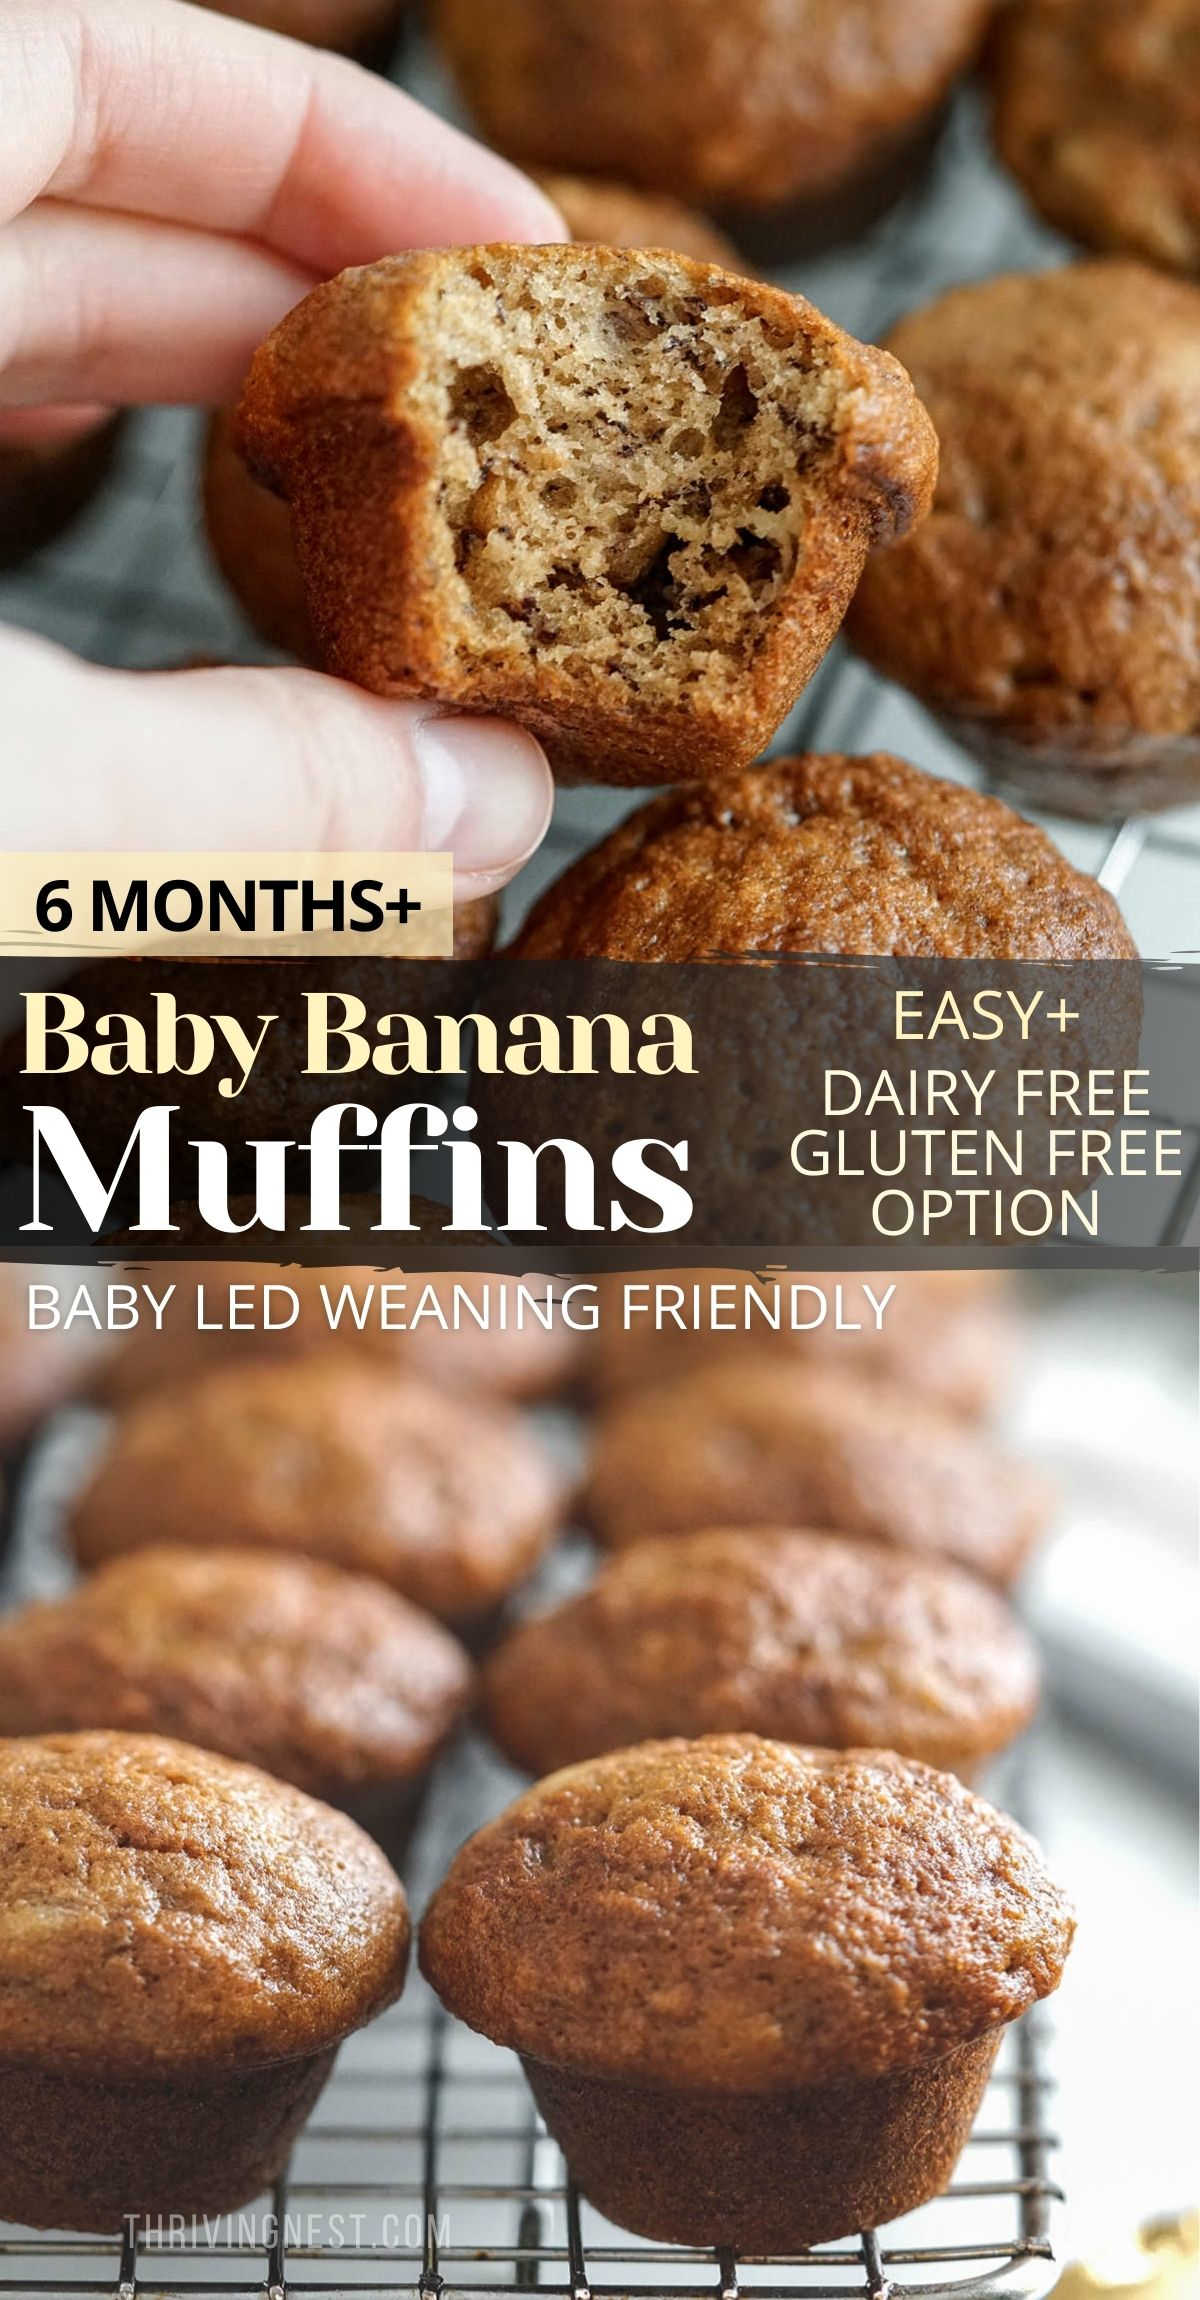 Easy soft banana muffins for baby ready in just 30 minutes. These healthy baby banana muffins are so fluffy, moist - perfect for babies six month and up, for baby led weaning (BLW), including toddlers, older kids and even adults. To make this baby banana muffin recipe you don’t need special equipment, just a fork and one bowl. Also make the banana muffins dairy free and gluten free. #bananamuffins #babymuffins #babyledweaning #babyfood #healthymuffins #babyrecipes #toddler #fingerfood #blw #breakfast #easy